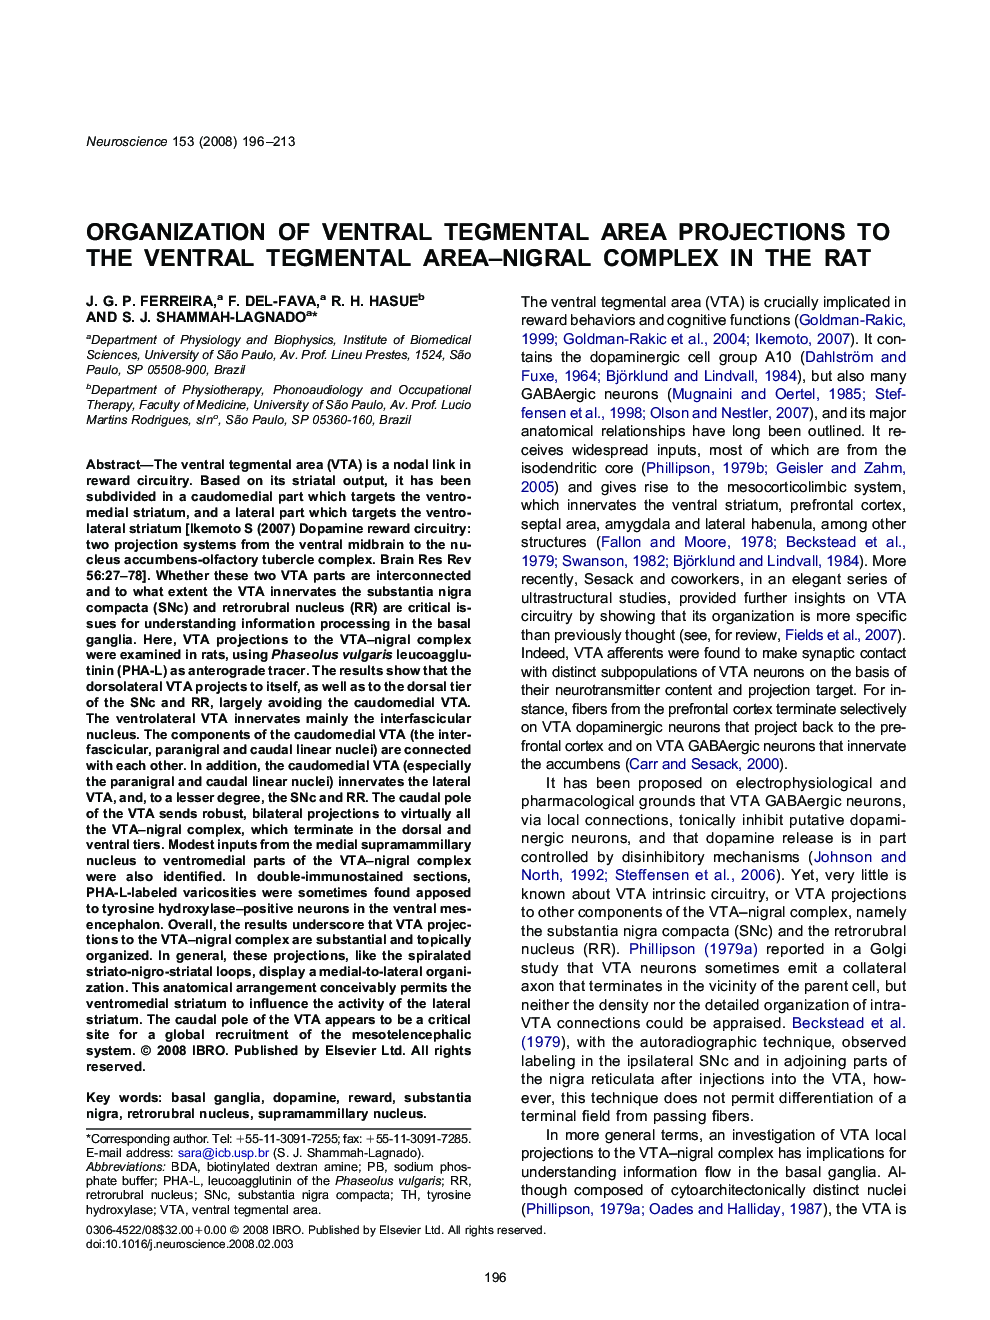 Organization of ventral tegmental area projections to the ventral tegmental area-nigral complex in the rat